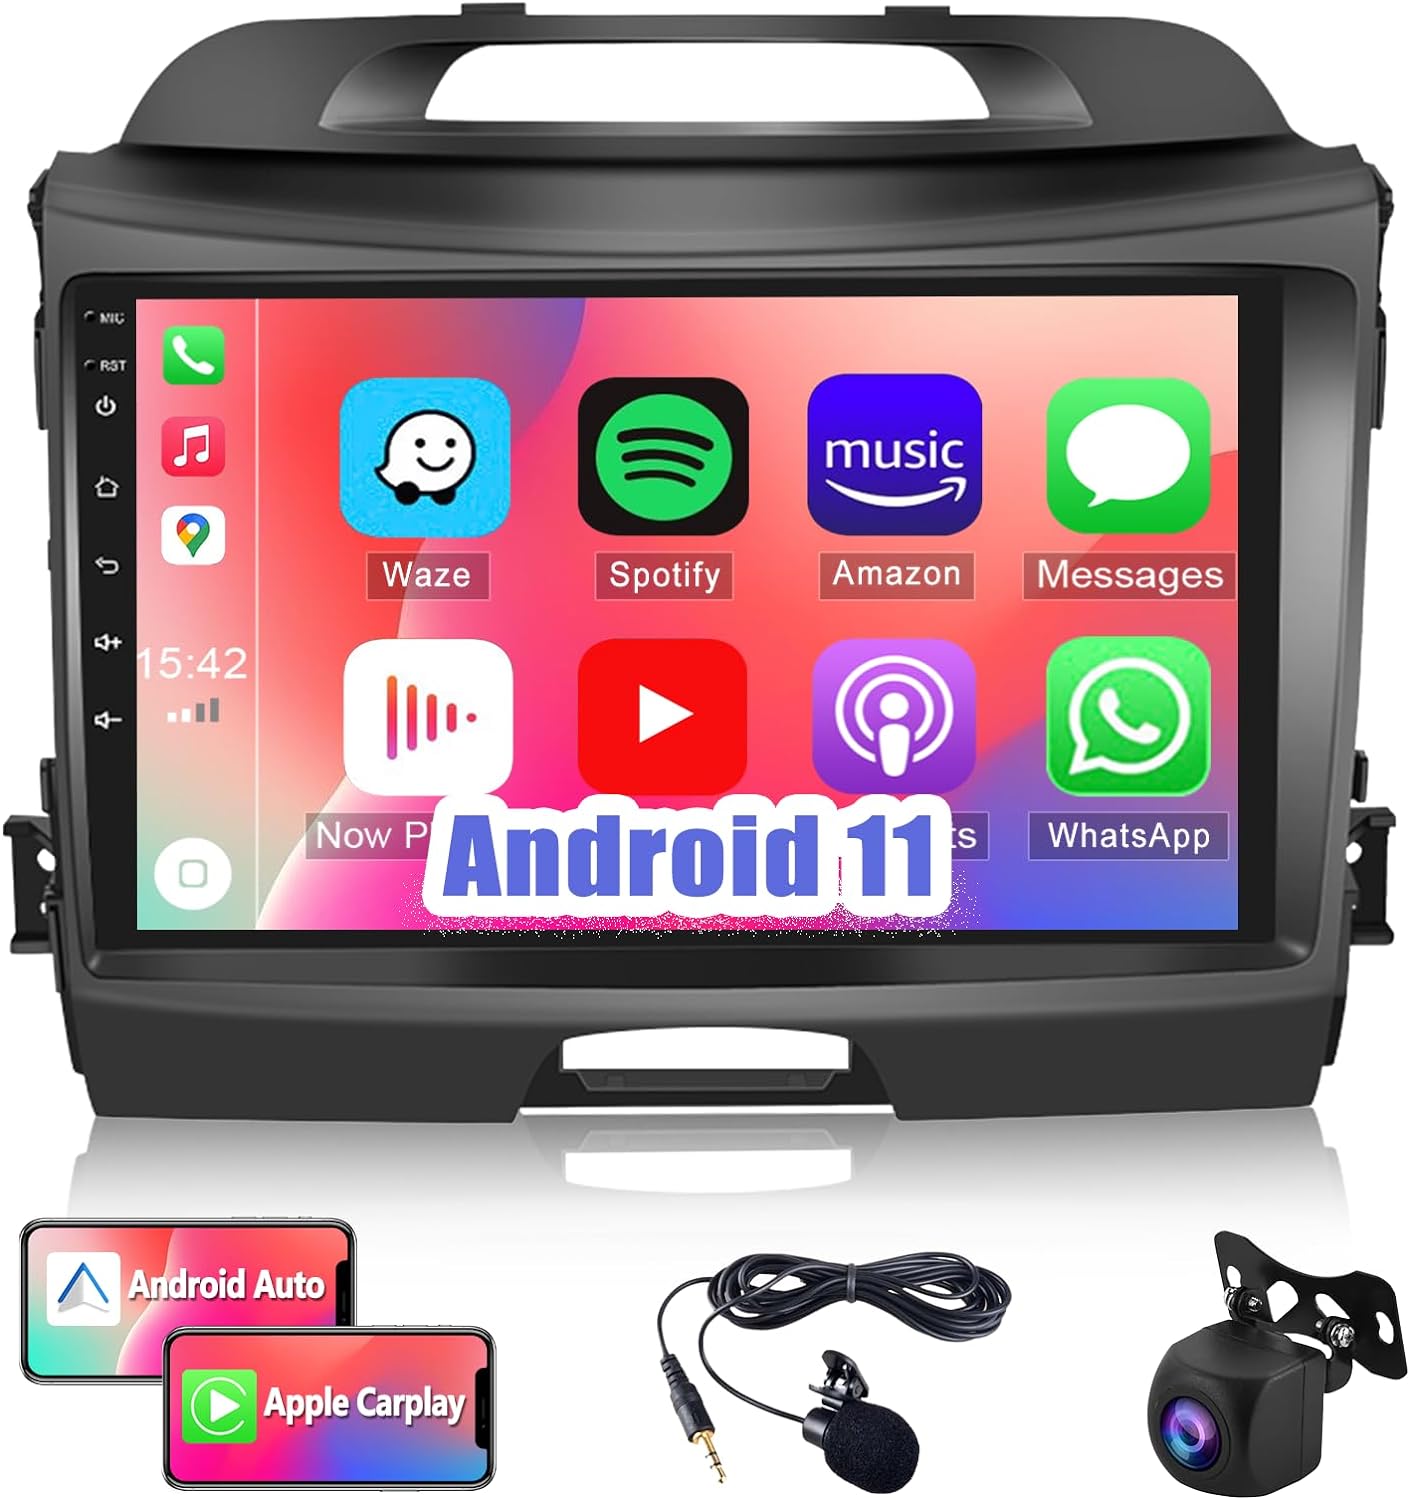 CAMECHO Android 11 Car Stereo for Kia Sportage 2010-2015 with Wireless Apple Carplay Android Auto 9 Inch Touch Screen Radio with GPS Sat Nav HiFi Bluetooth FM RDS SWC WiFi + Reverse Camera